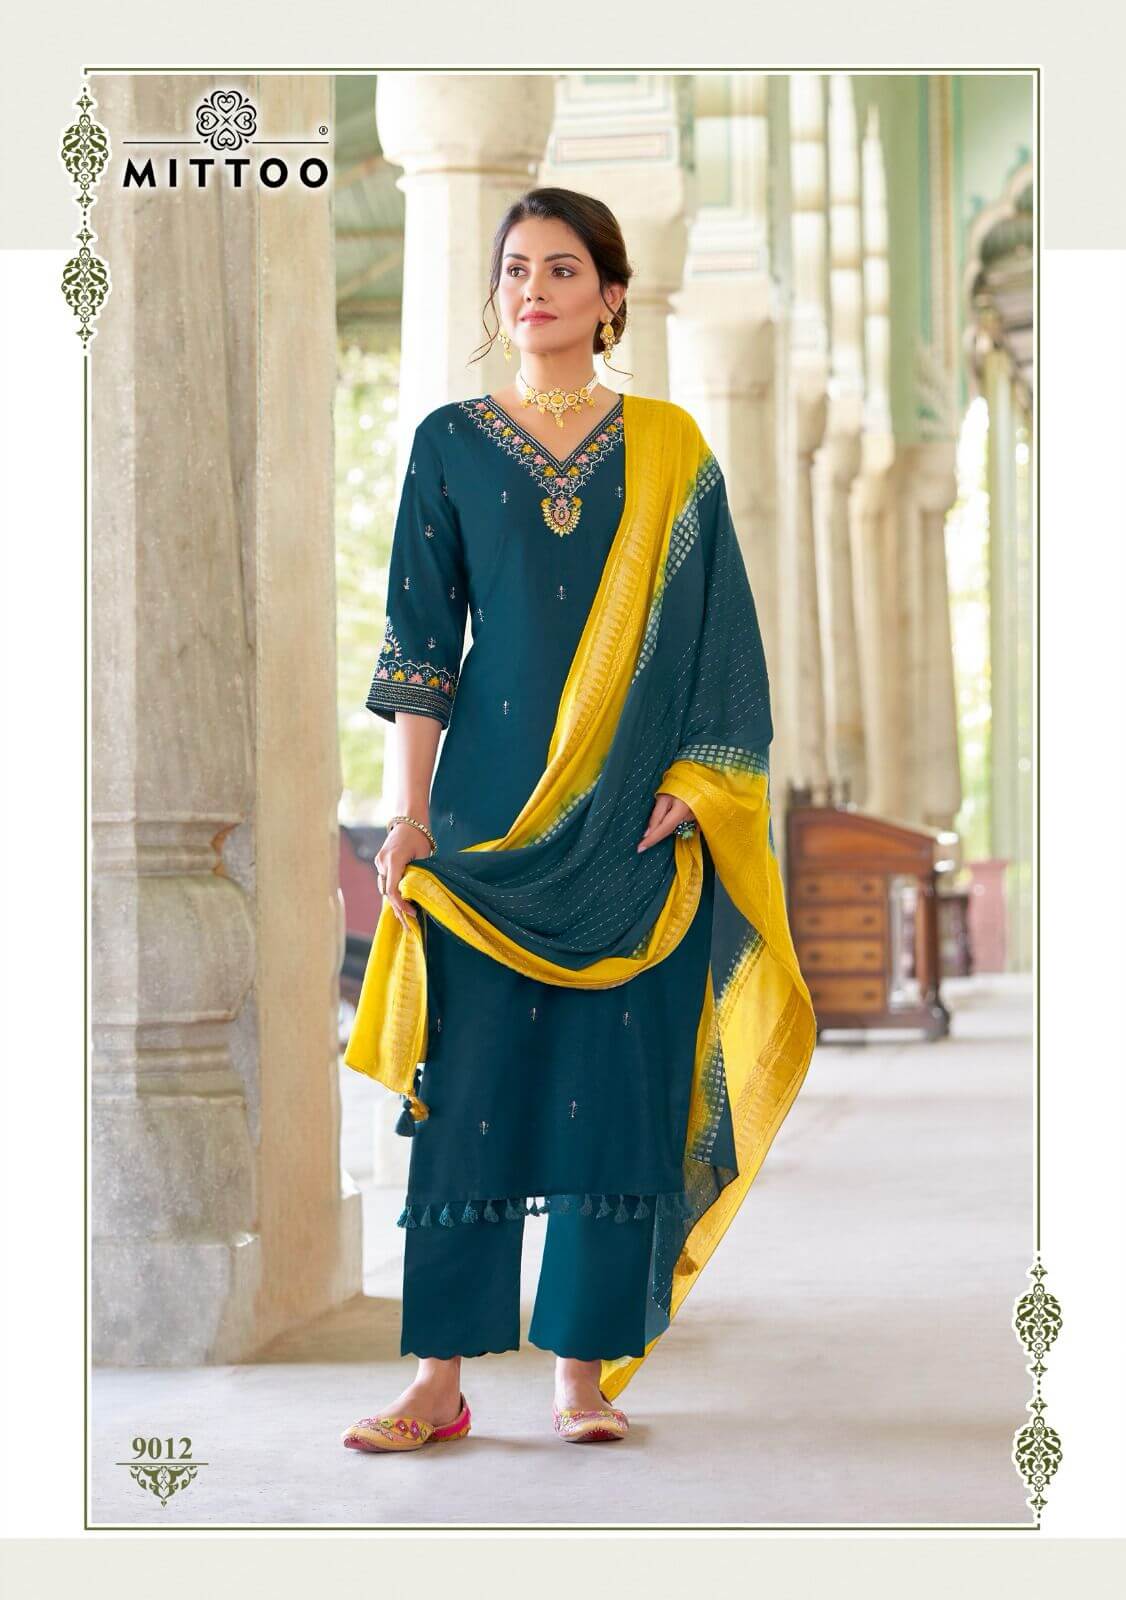 Mittoo Mosam Vol 2 Embroidery Salwar Kameez Catalog collection 3